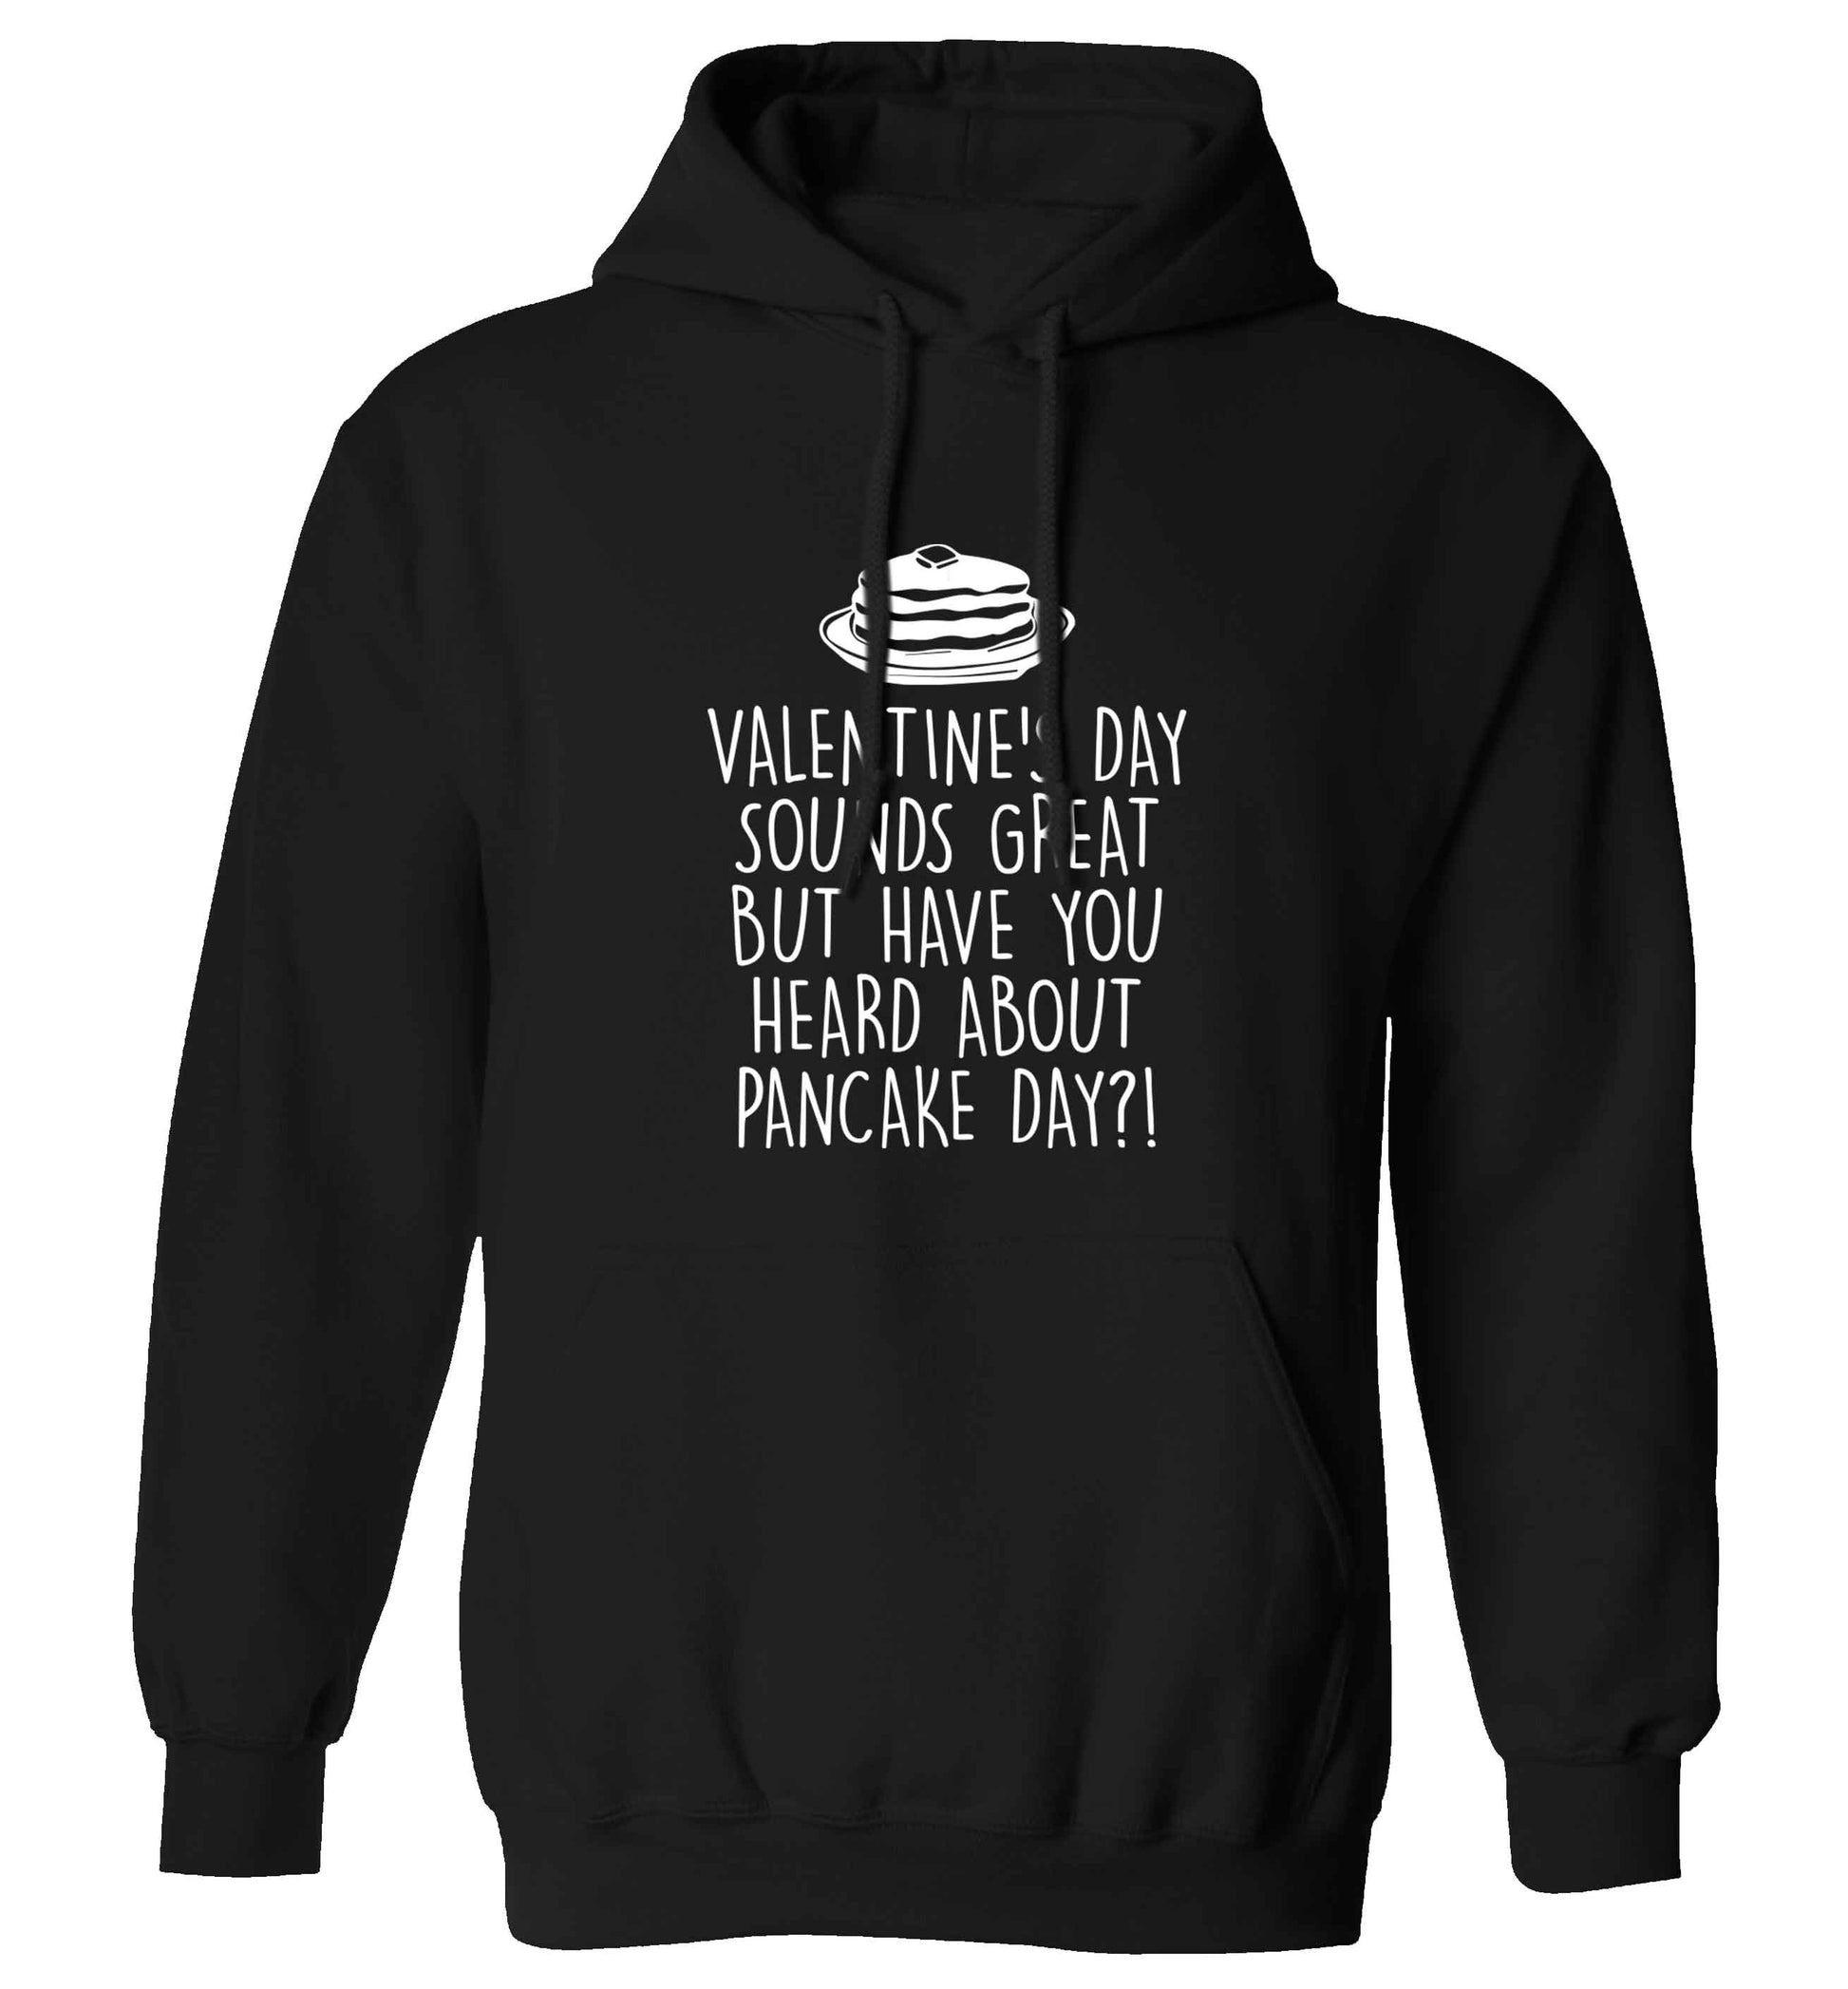 Valentine's day sounds great but have you heard about pancake day?! adults unisex black hoodie 2XL